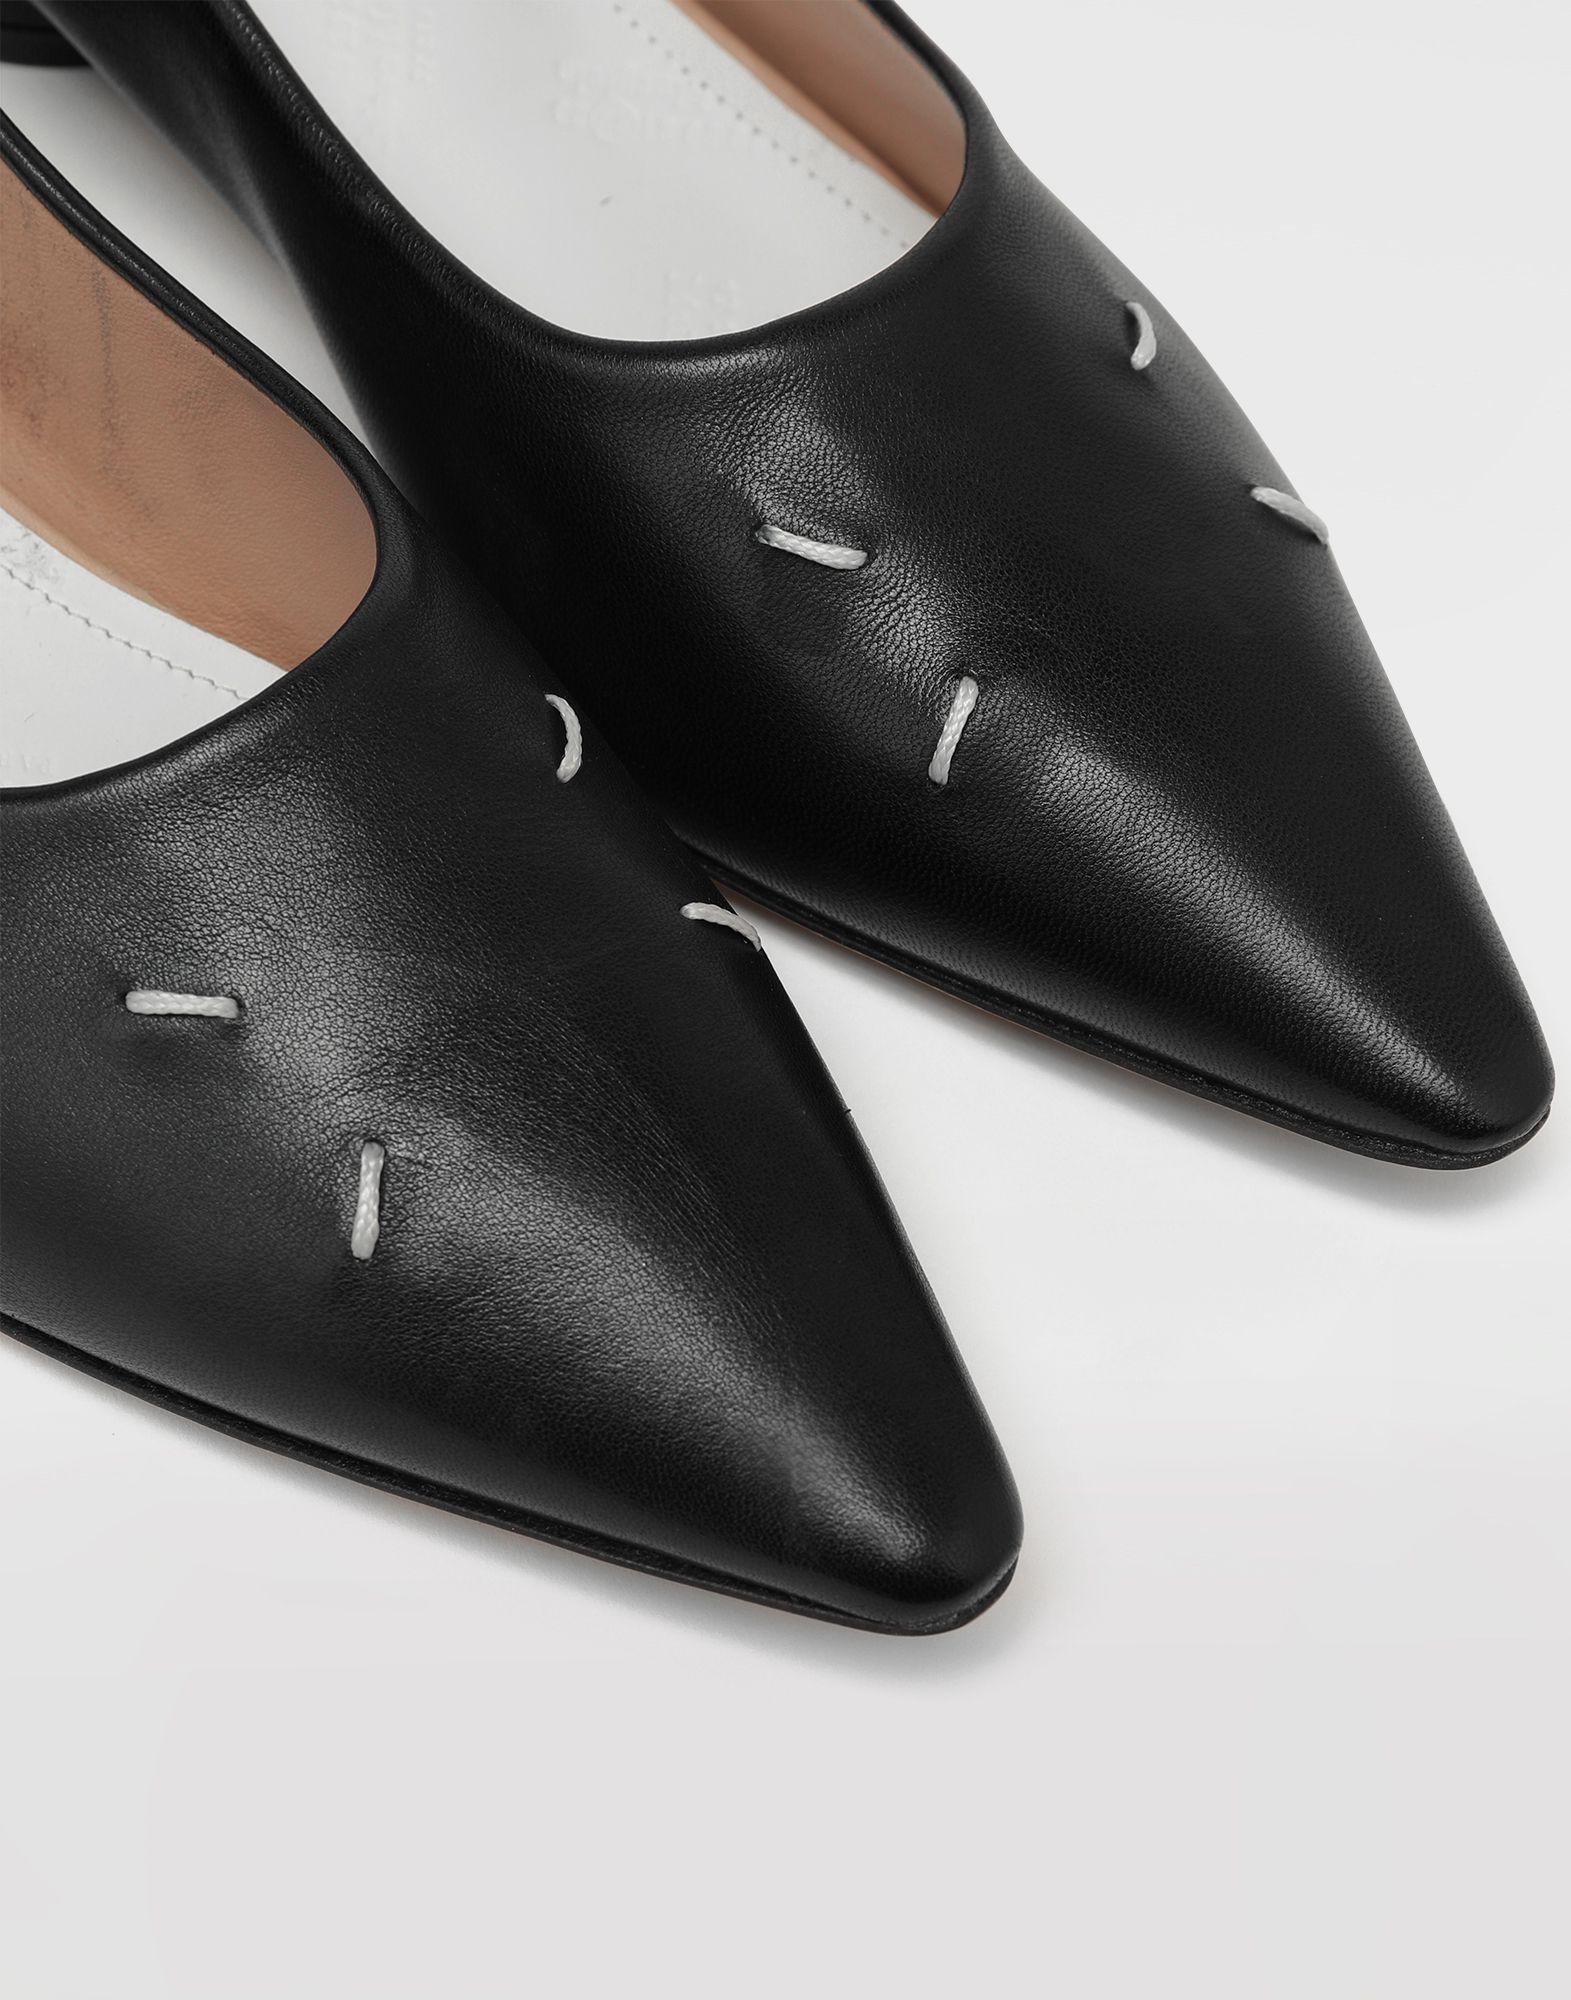 Maison Margiela 4-stitches Leather Loafers in Black - Lyst